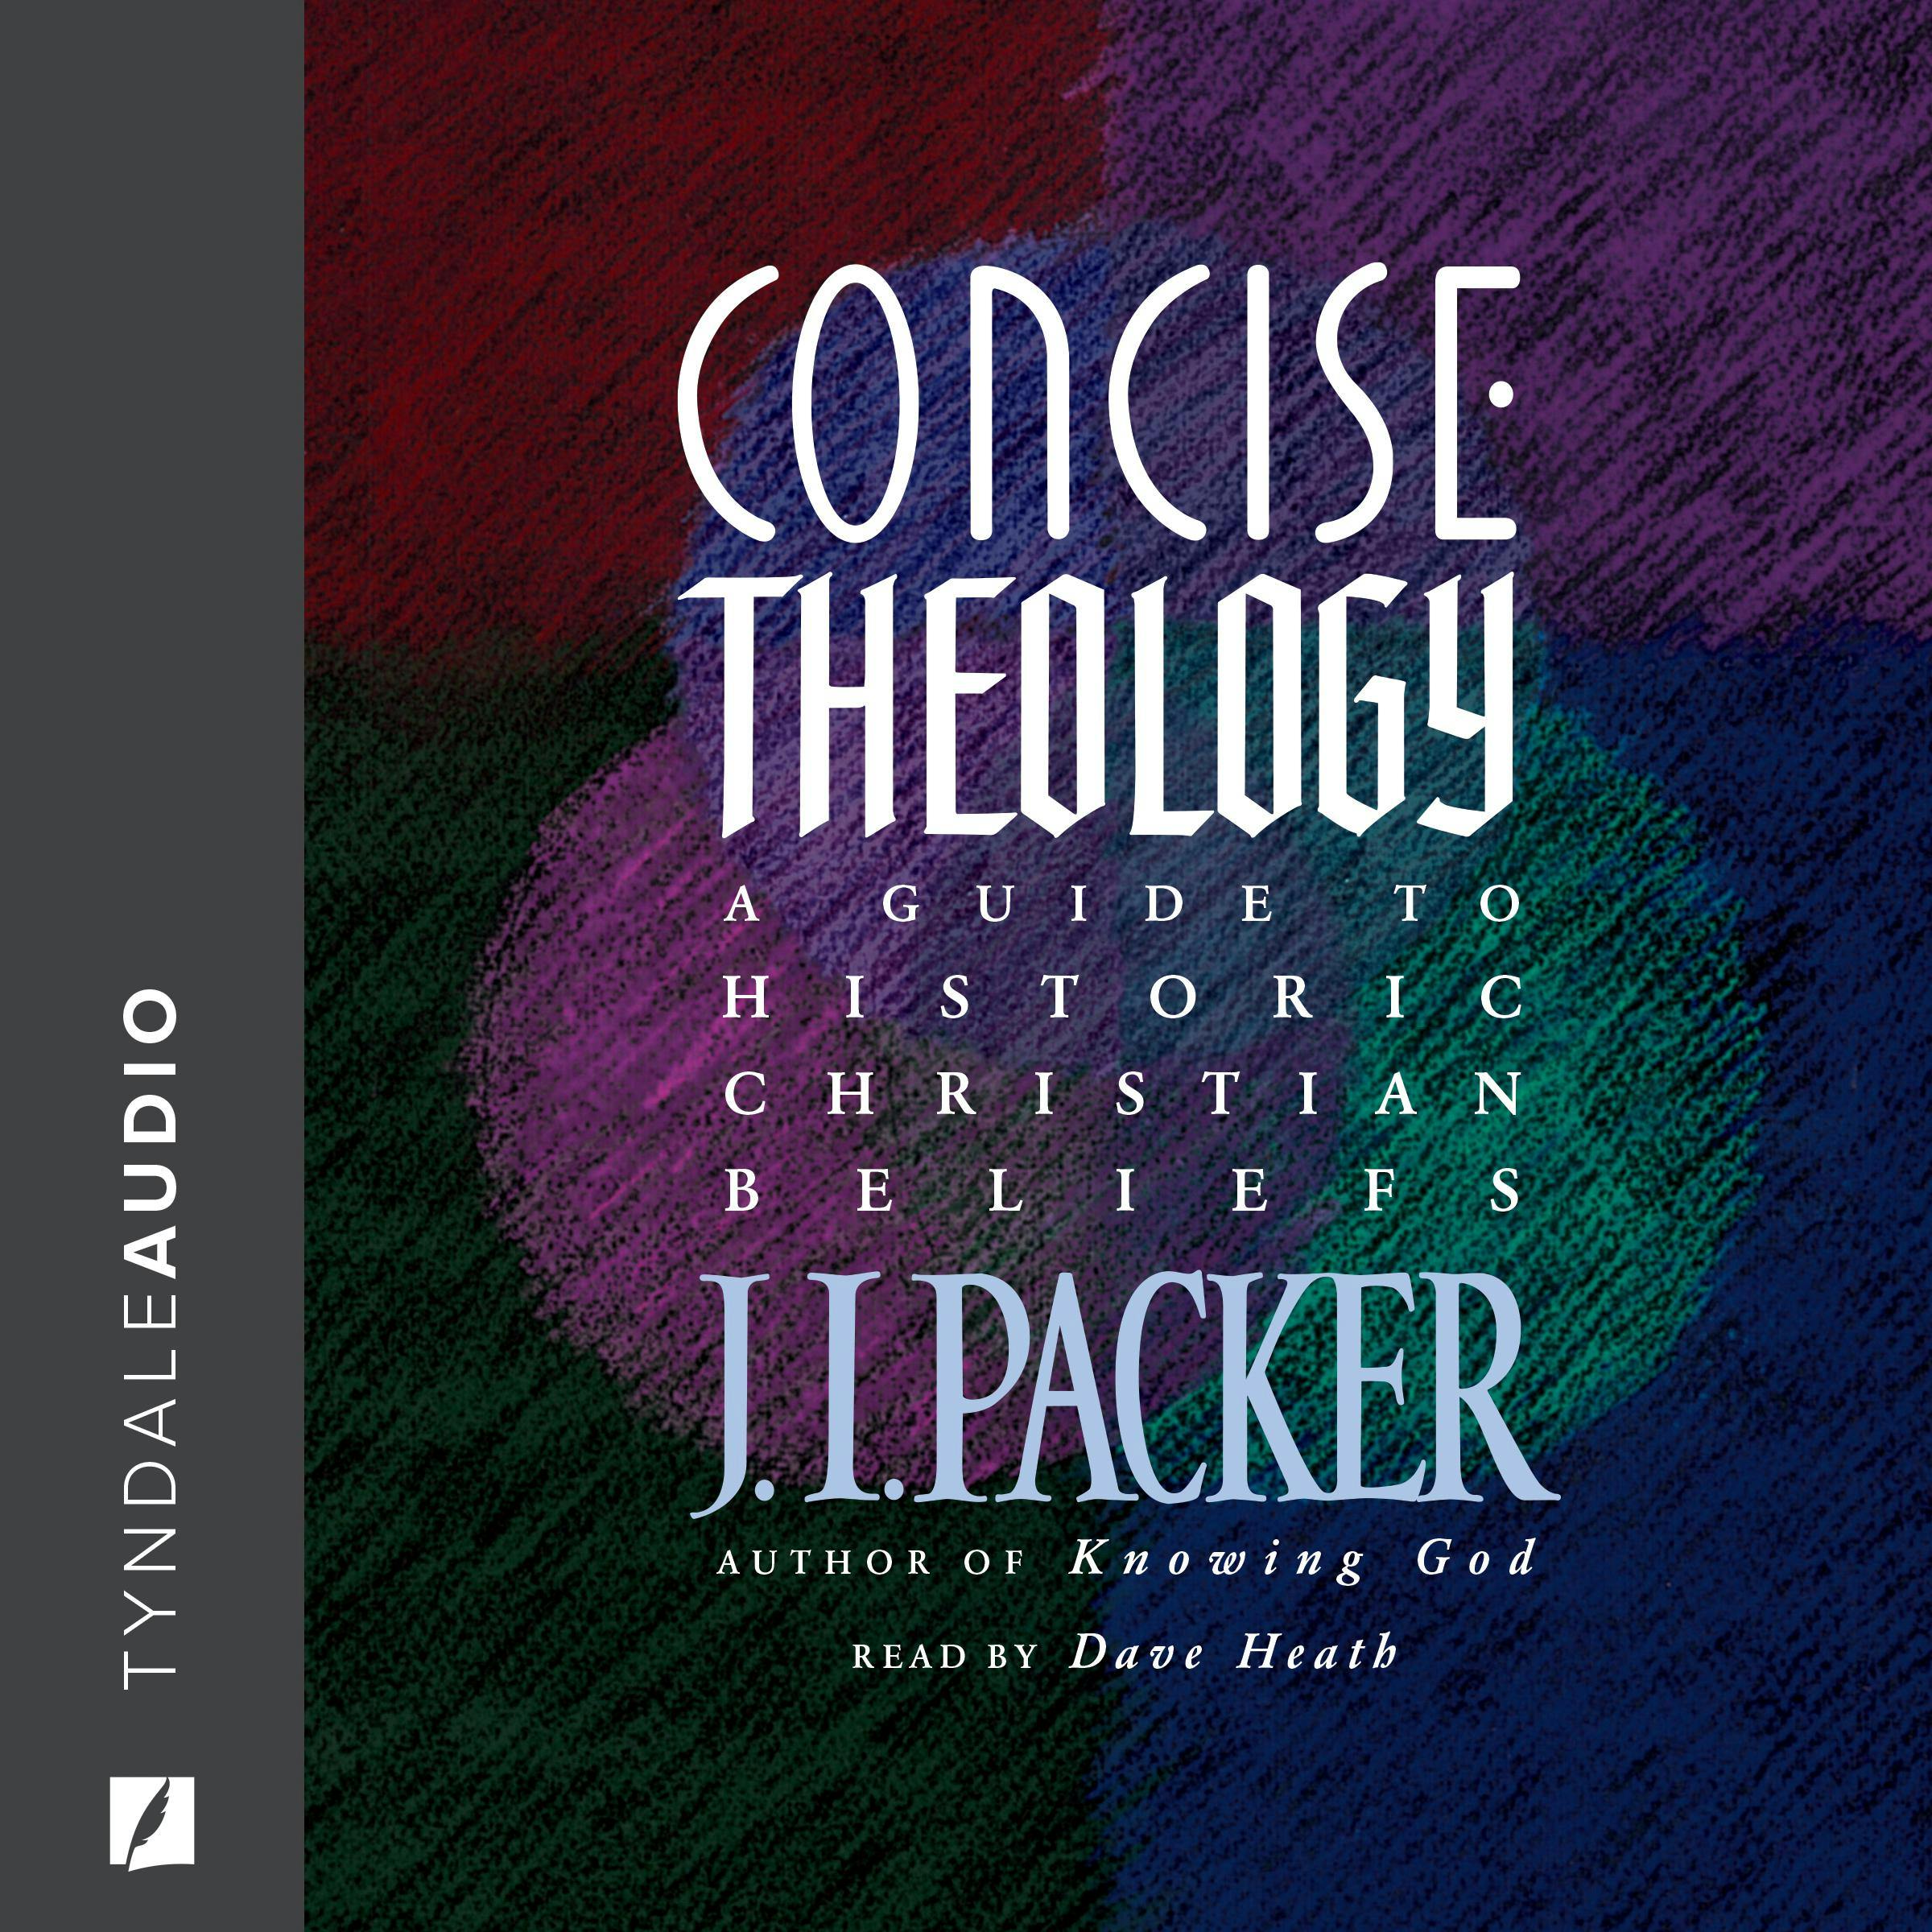 Concise Theology: A Guide to Historic Christian Beliefs - J. I. Packer